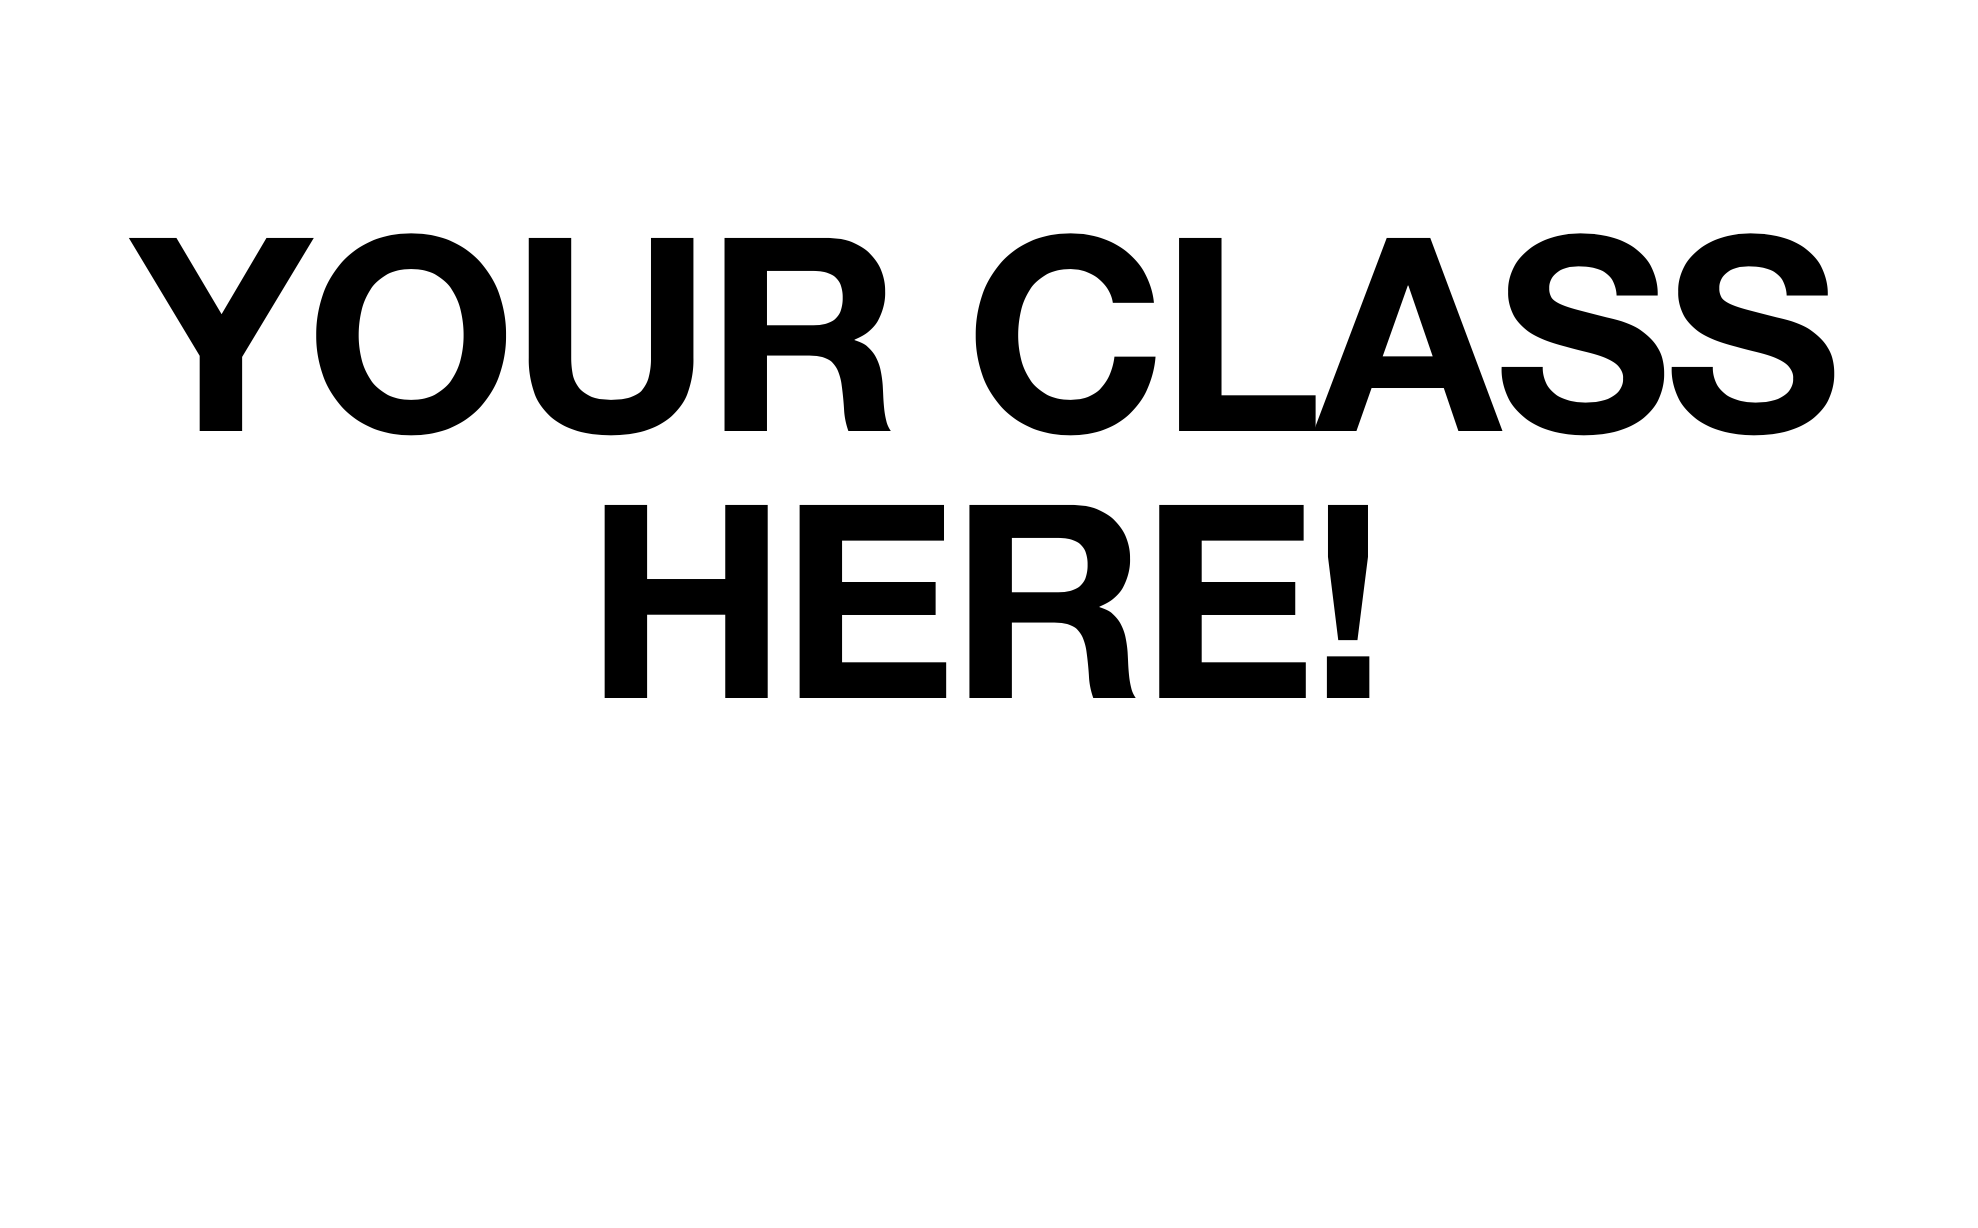 YOUR CLASS HERE! YourClassHere